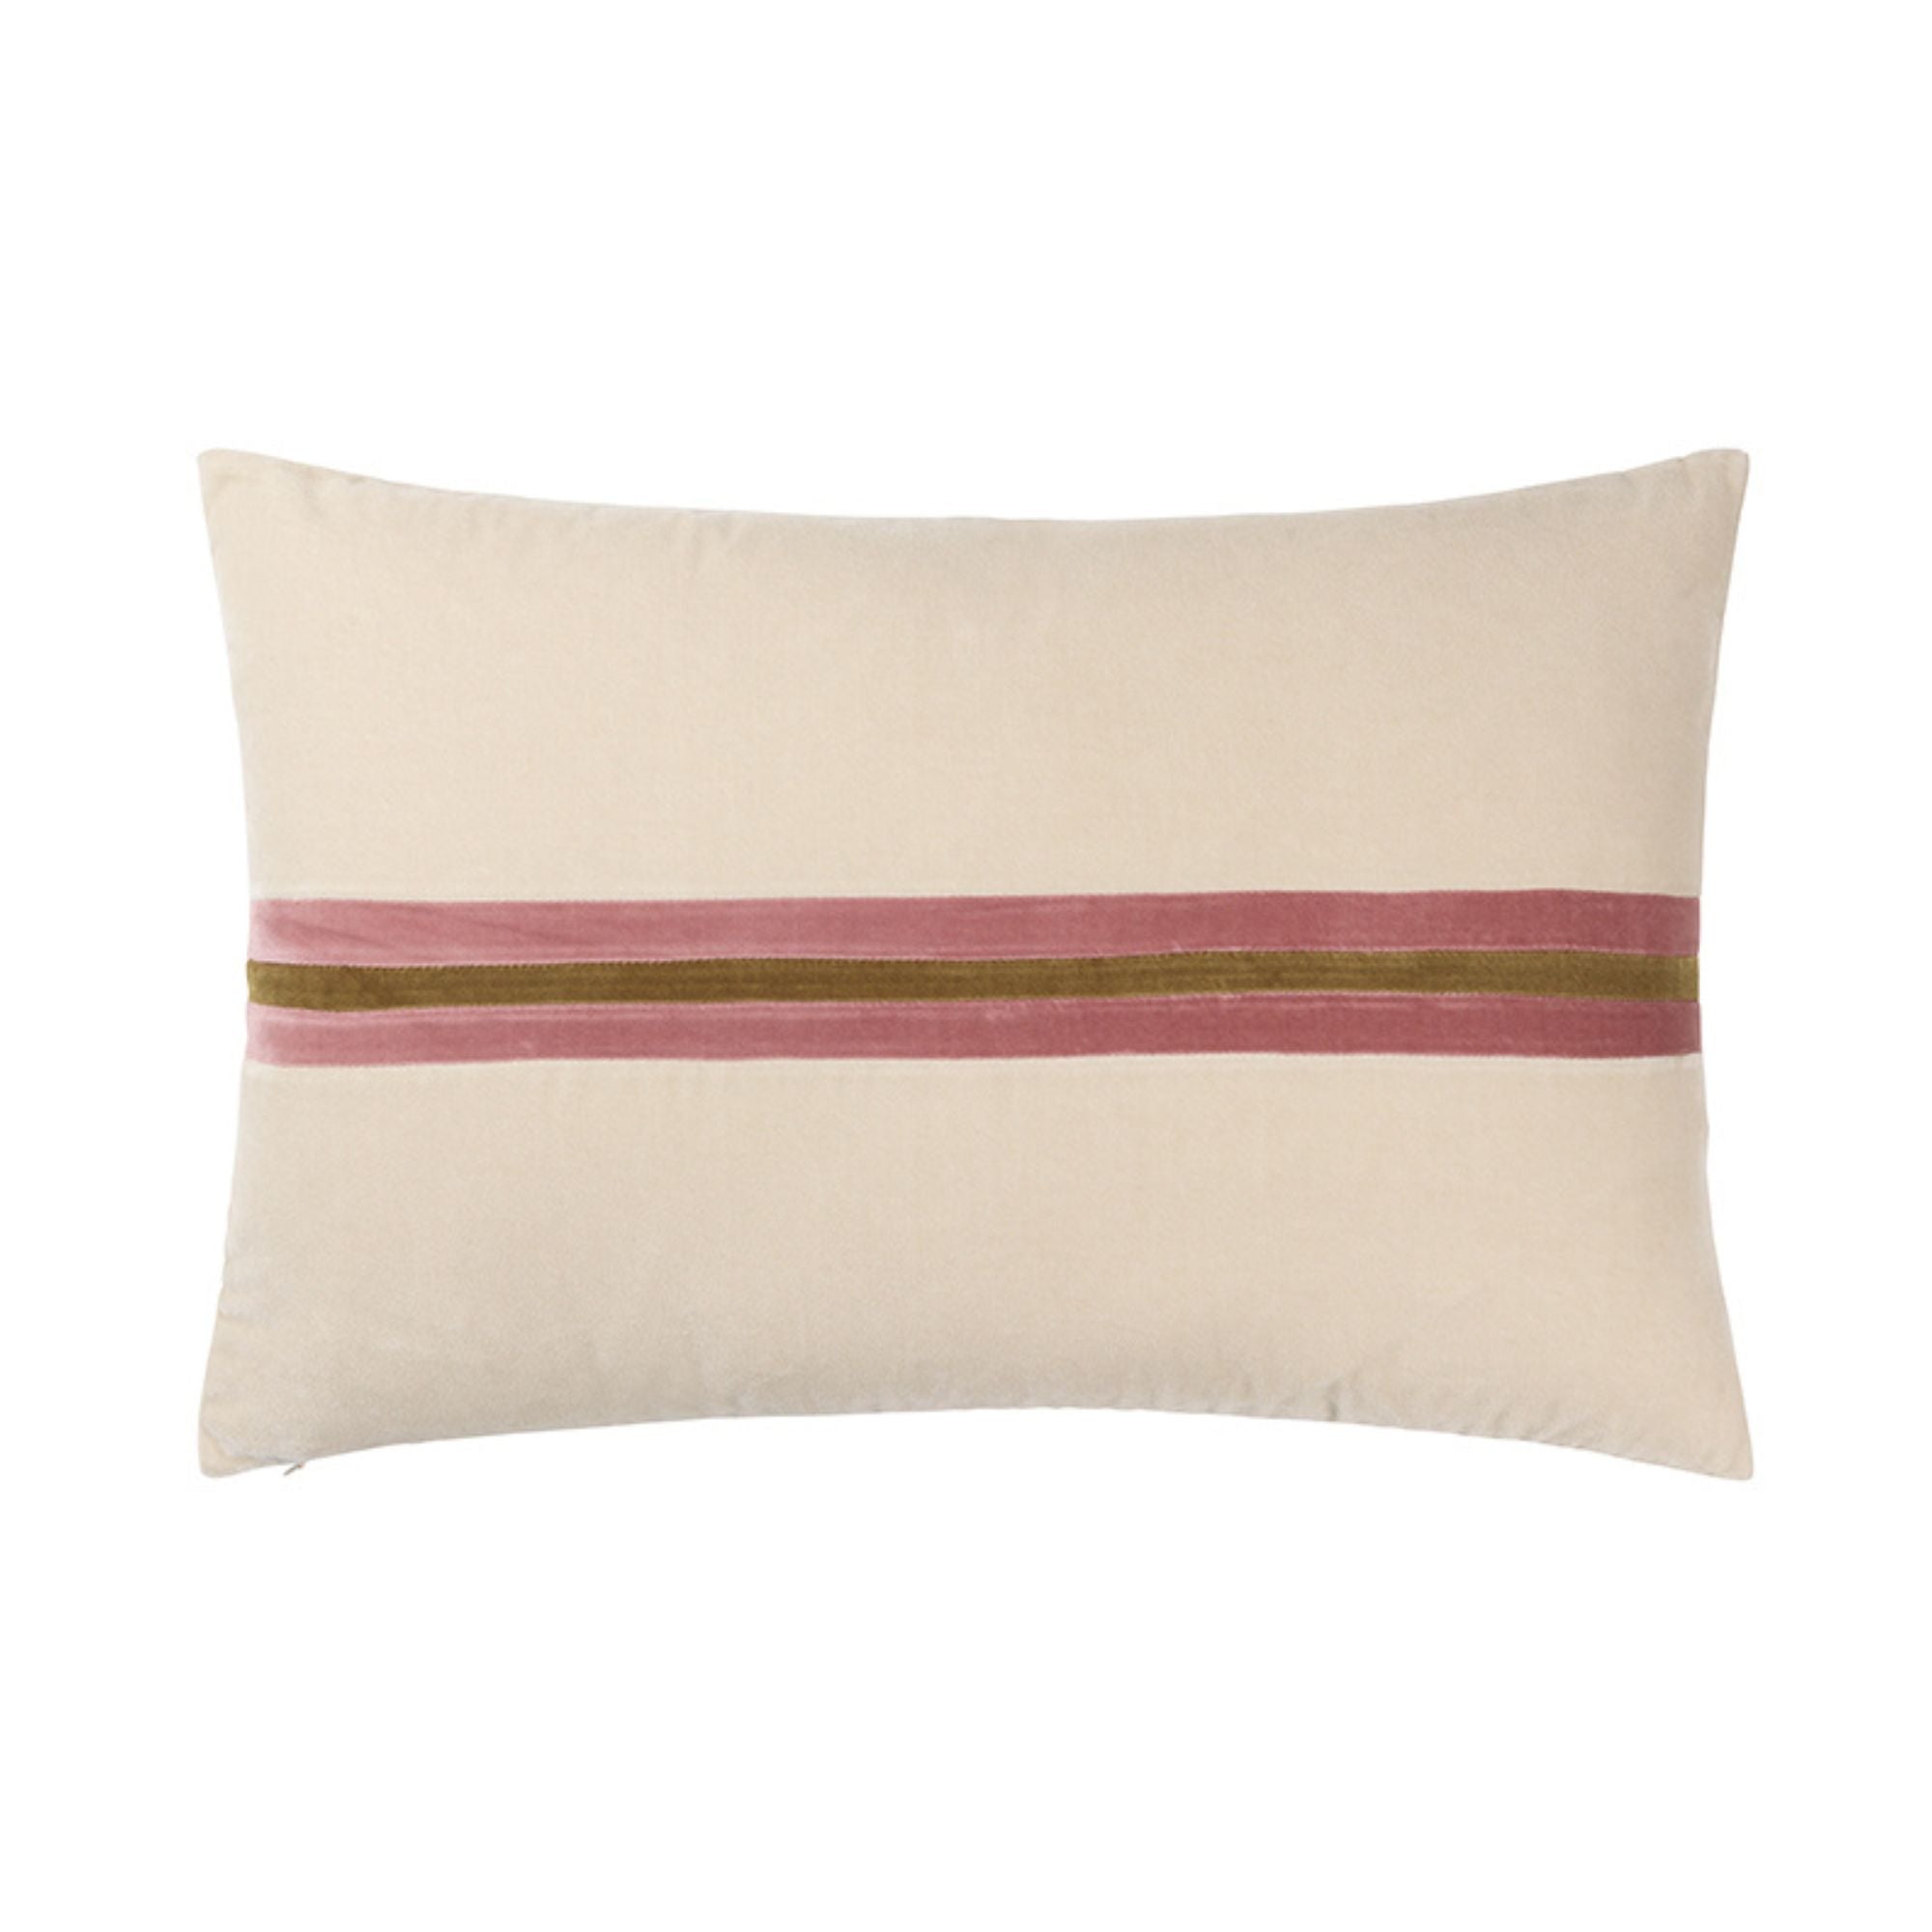 Harlow Cushion - Dusty White & Old Rose - THAT COOL LIVING